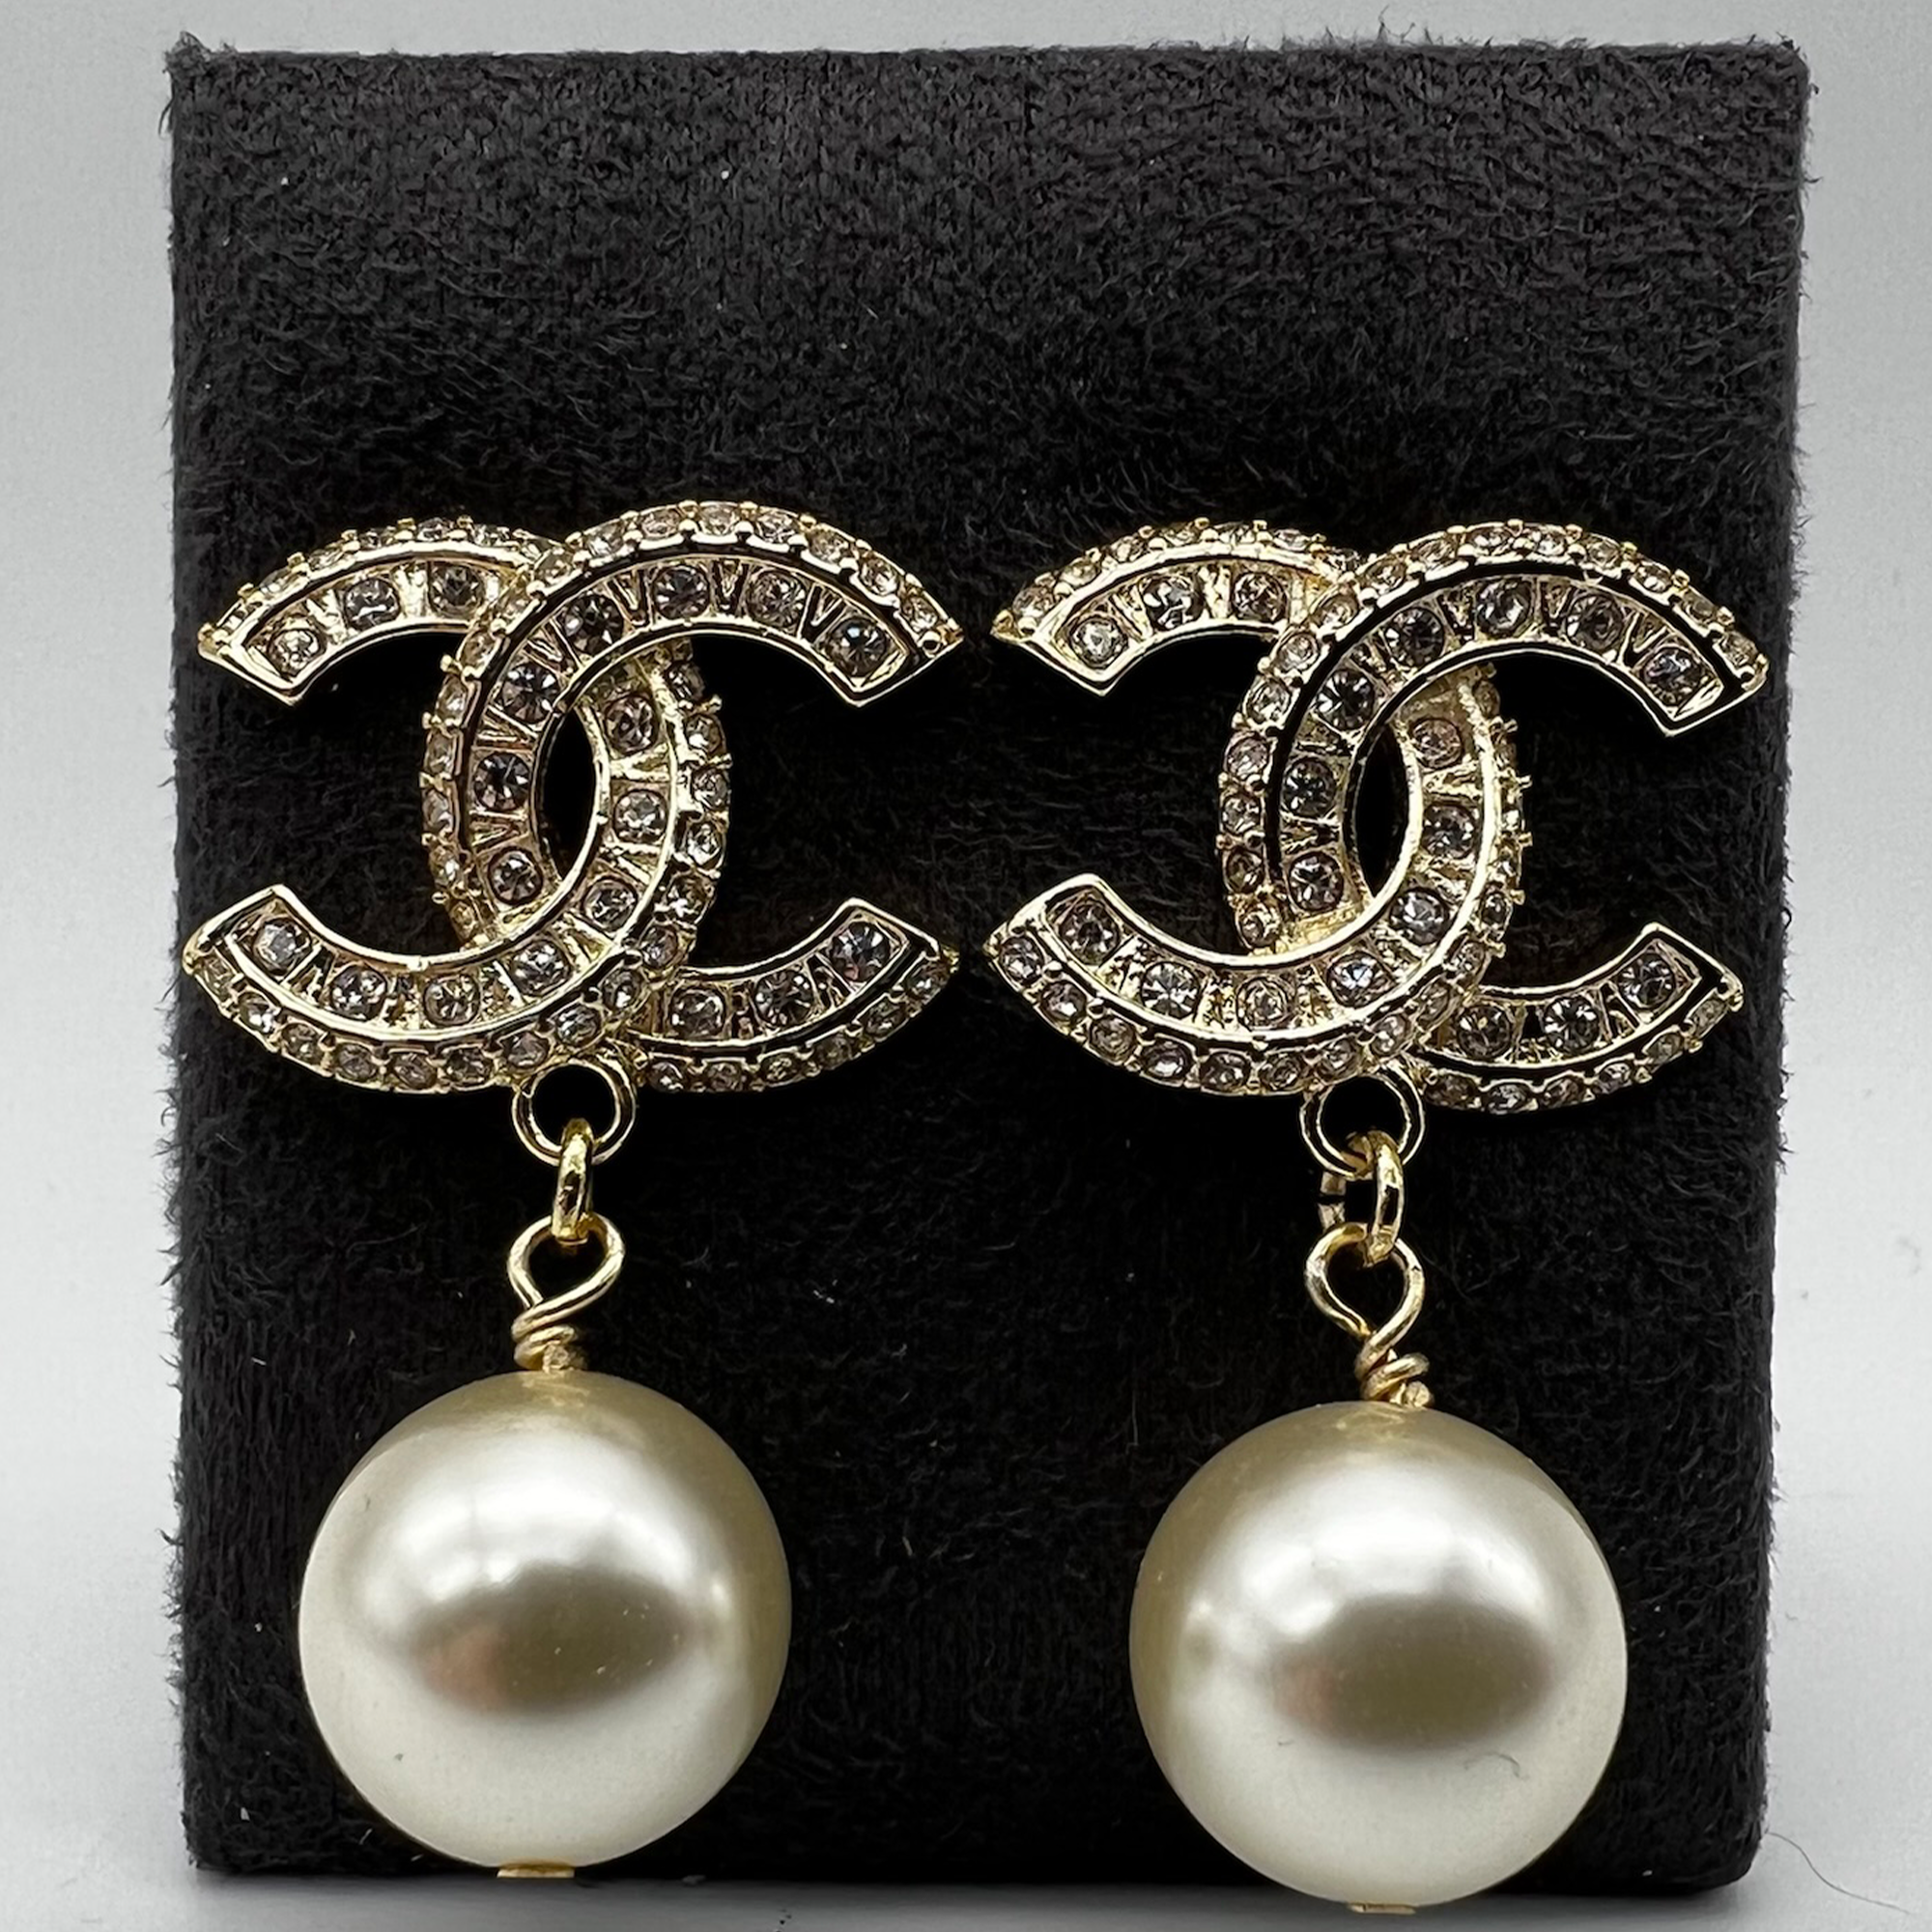 Chanel Cc Pearl Earrings Best Price In Pakistan  Rs 1400  find the best  quality of Jewelryjewellery  Bracelets Rings Neck Less Earrings  Hairpin Hand Cuff Pendant Bangles at Wishlistpkcom